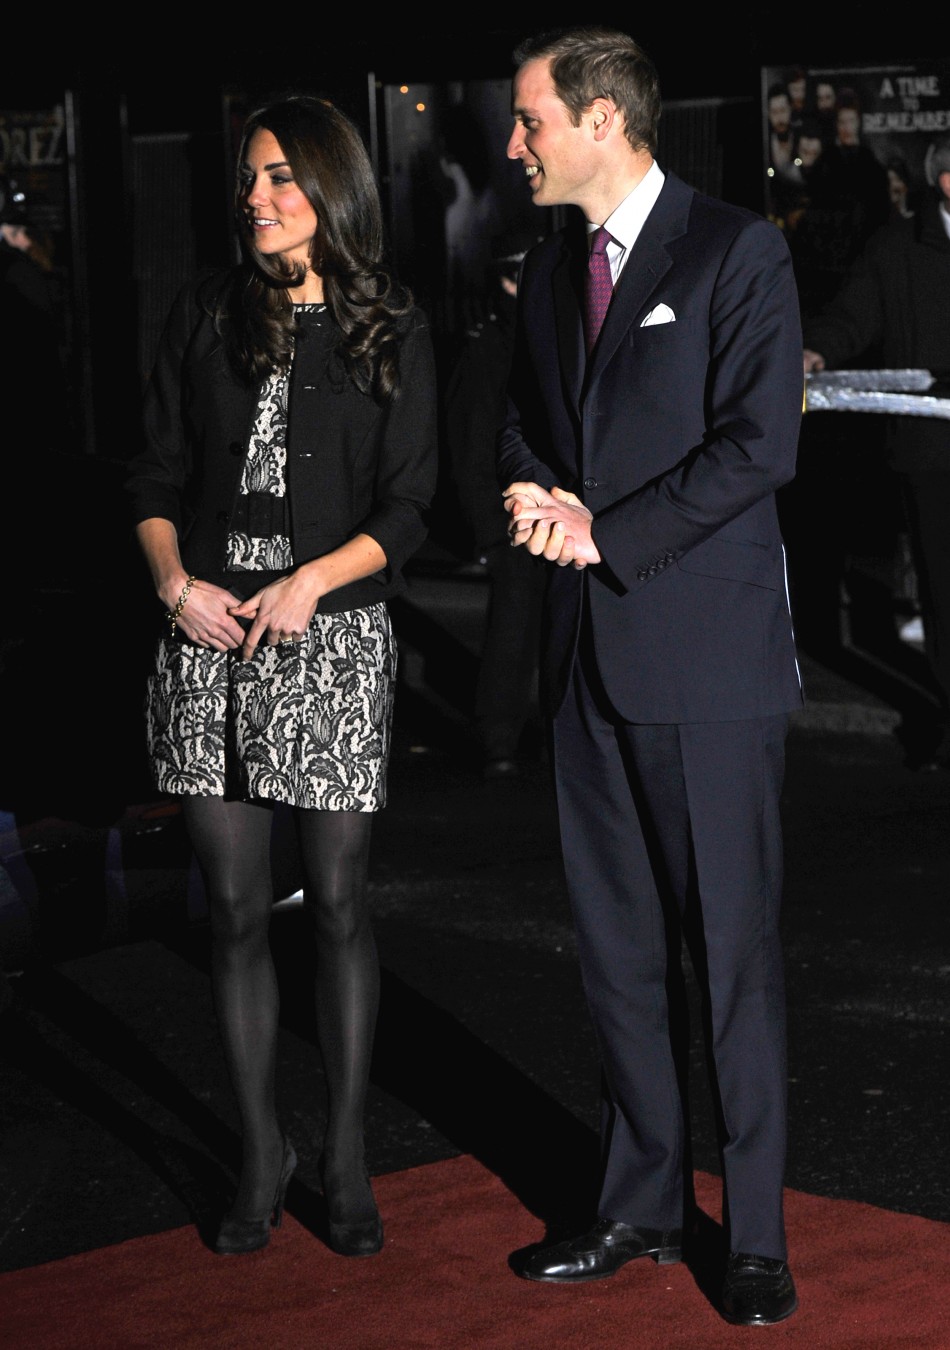 Prince William and Katherine at the Royal Albert Hall